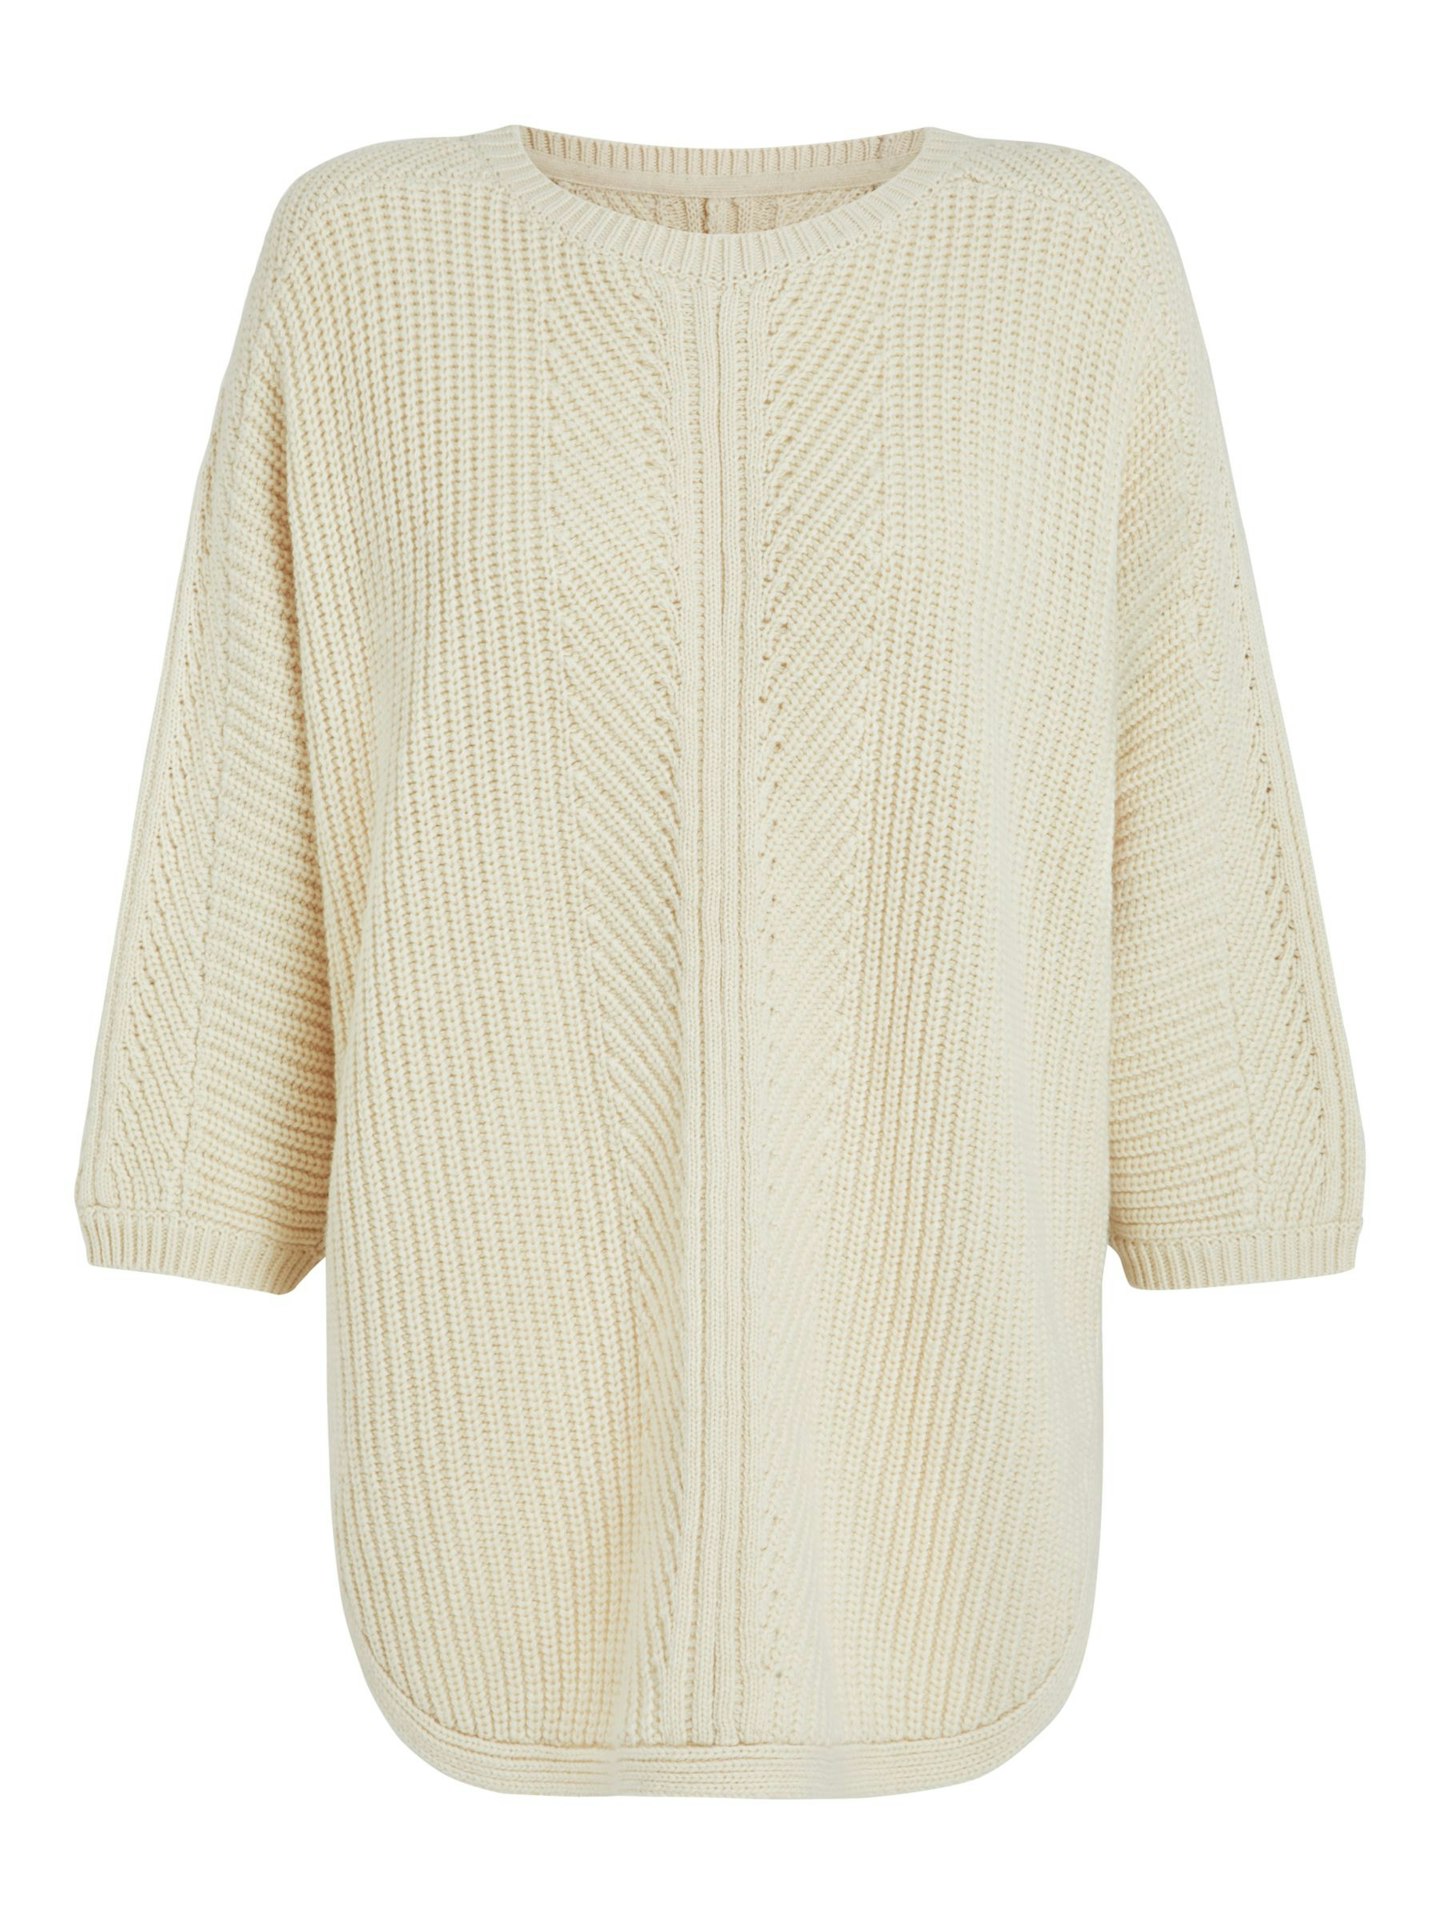 AND/OR, Sandy Cocoon Knit Jumper, £65